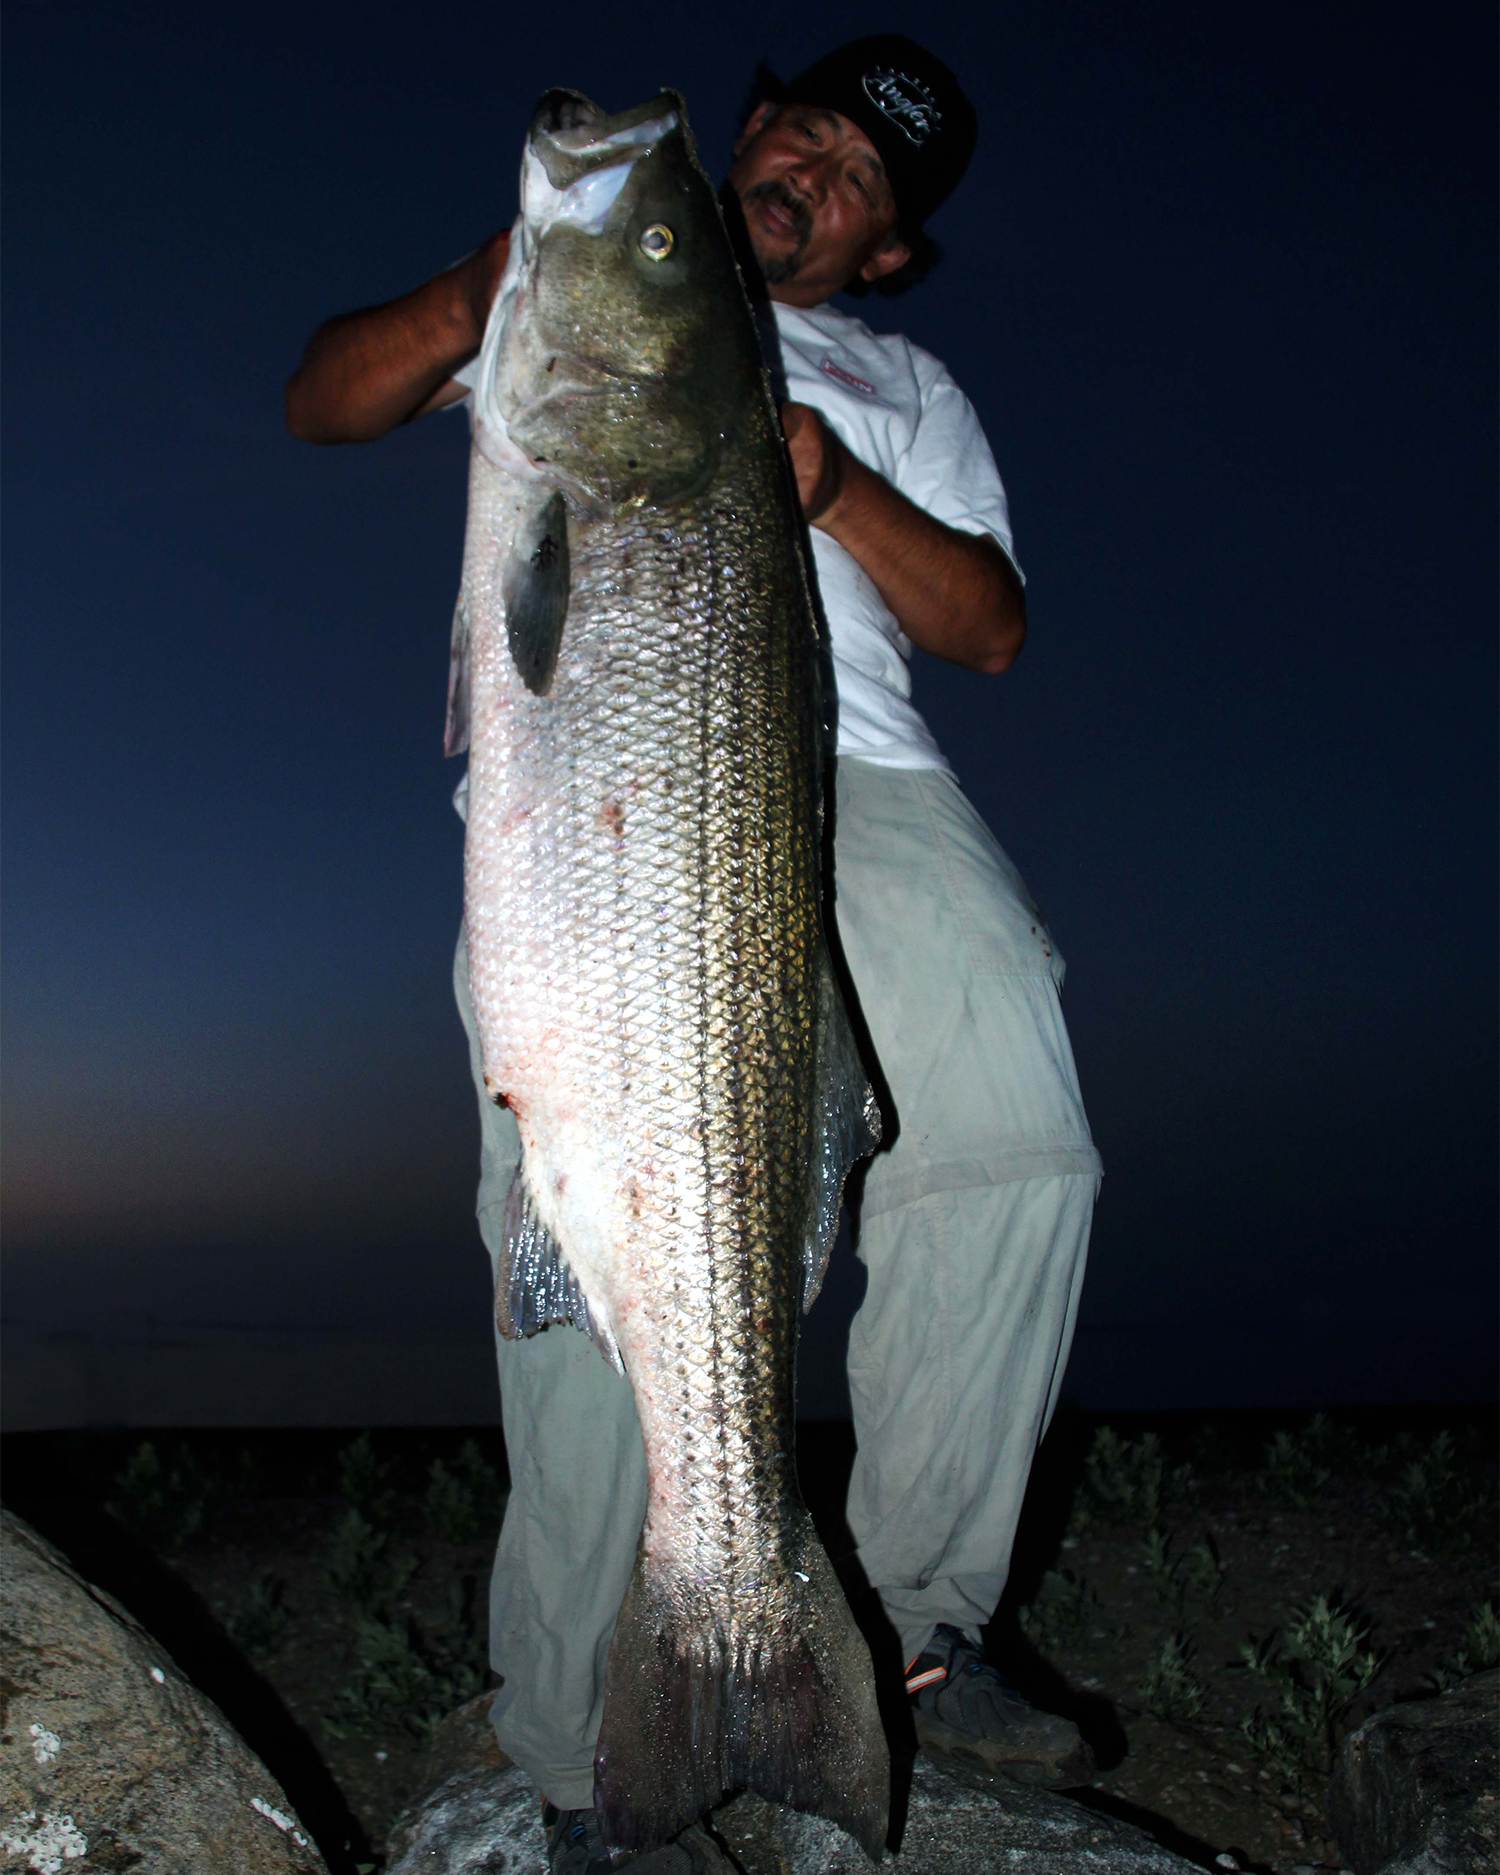 An angler with a large striped bass at night.